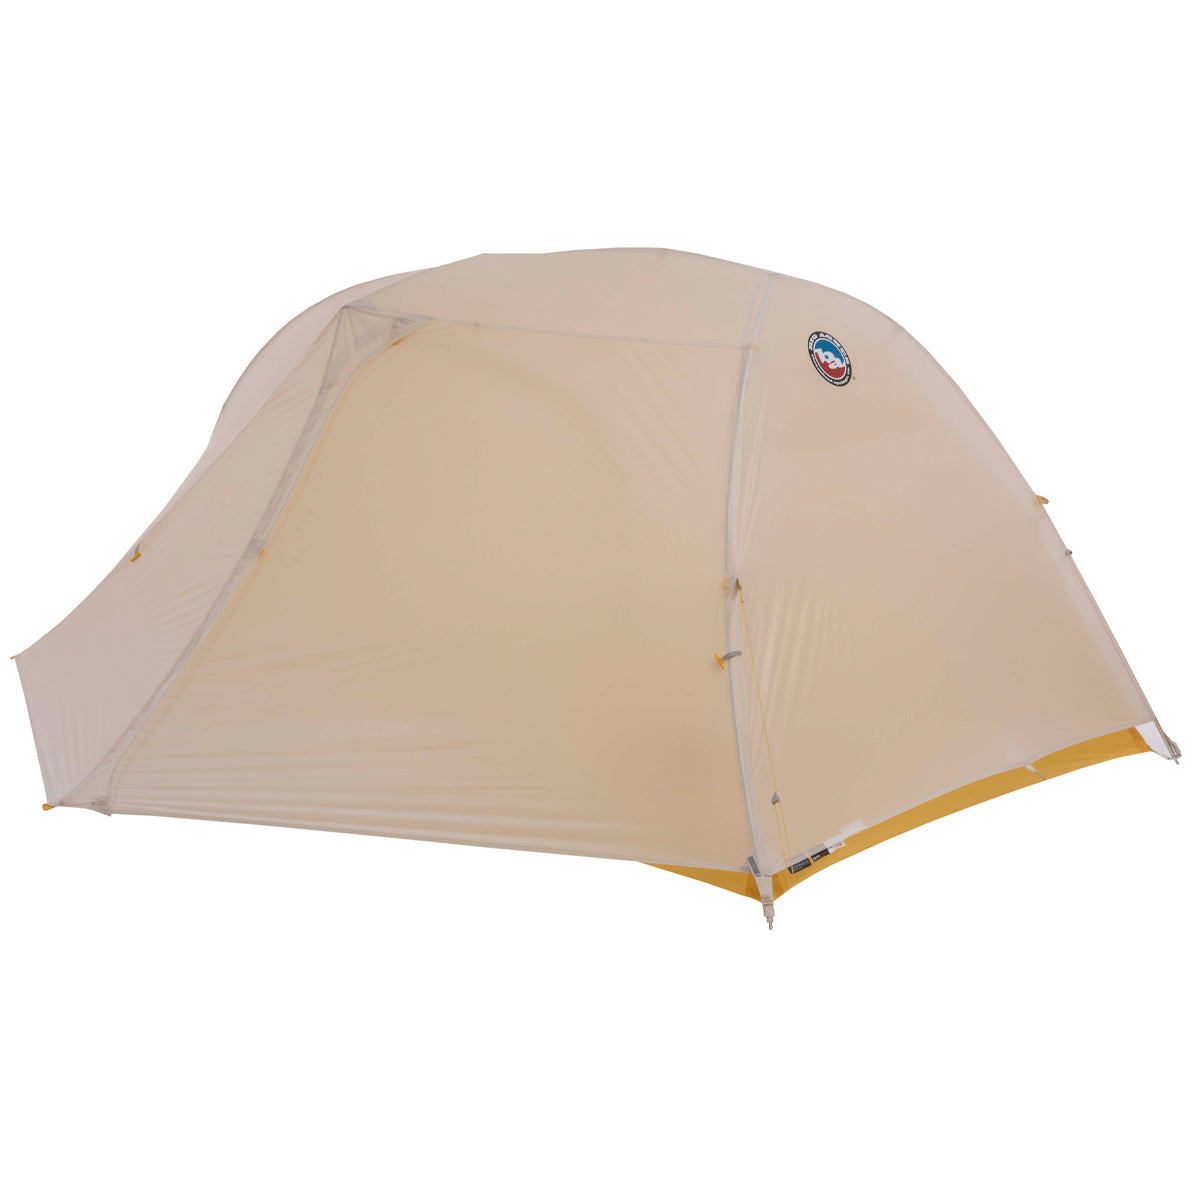 Big Agnes Tiger Wall UL 2 Person Solution Dye Tent